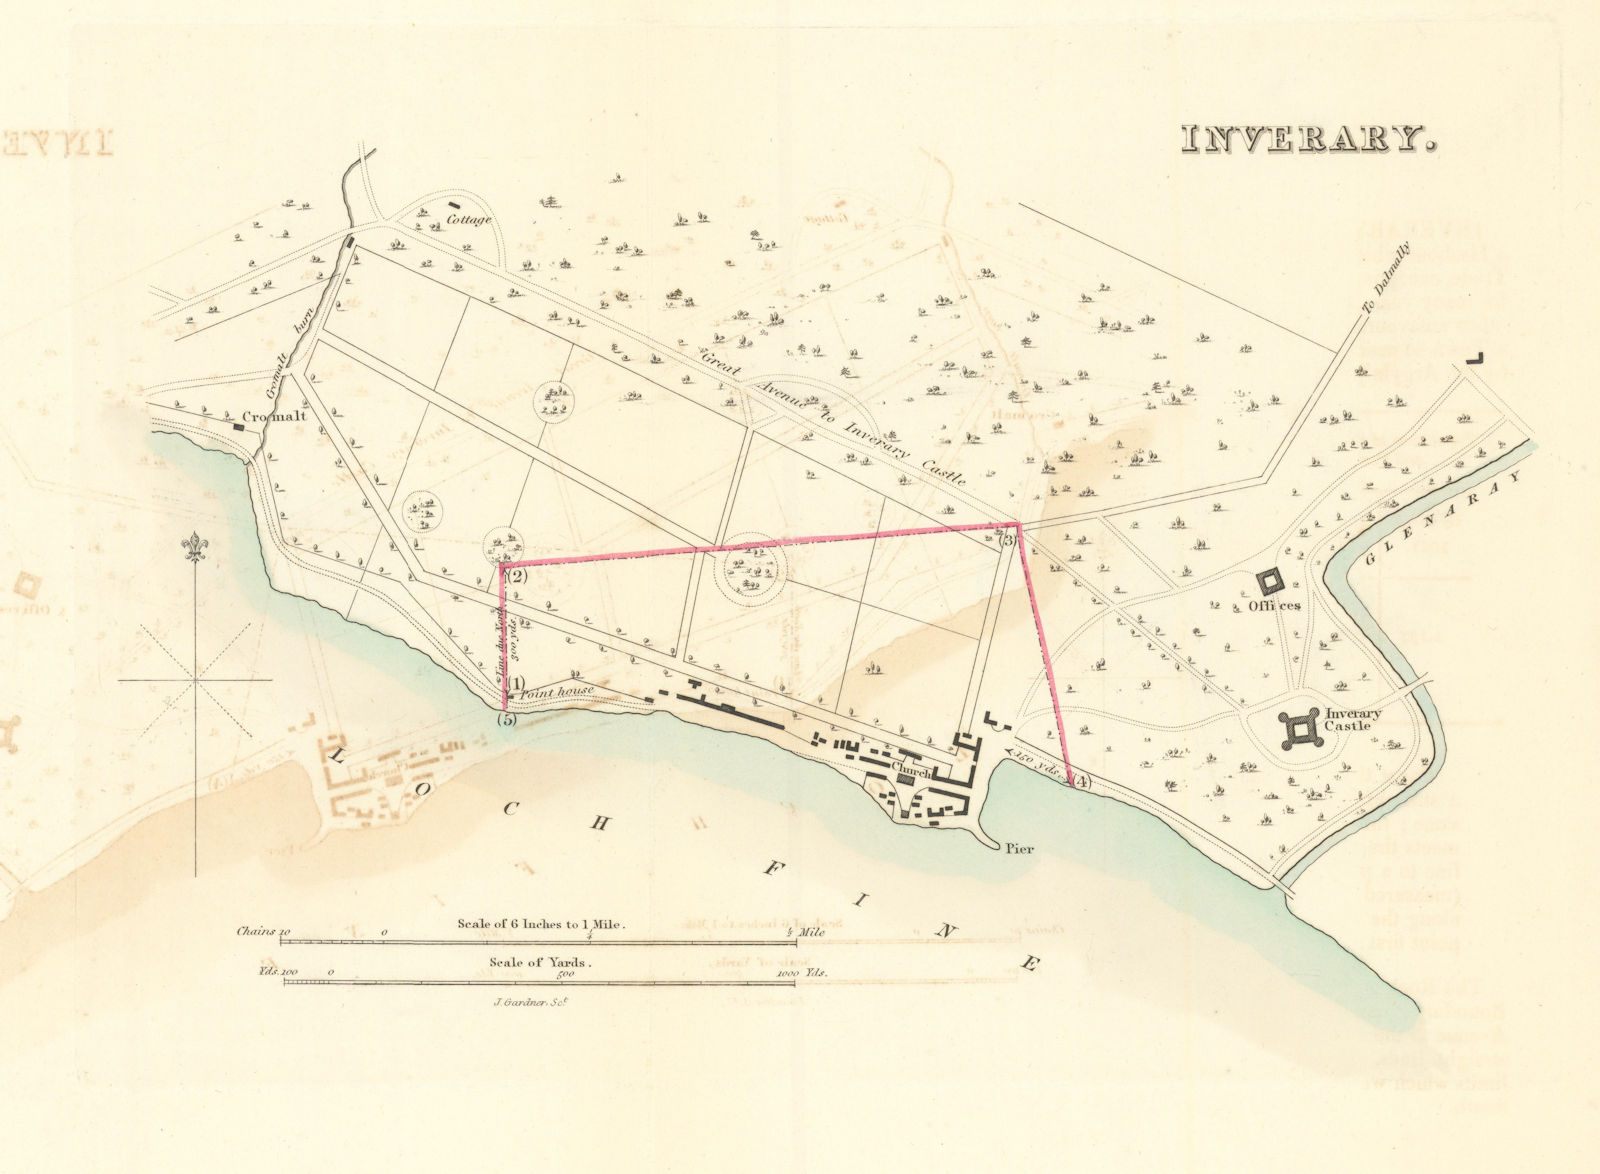 Associate Product INVERARAY borough/town plan for the REFORM ACT. Inverary. Scotland 1832 map